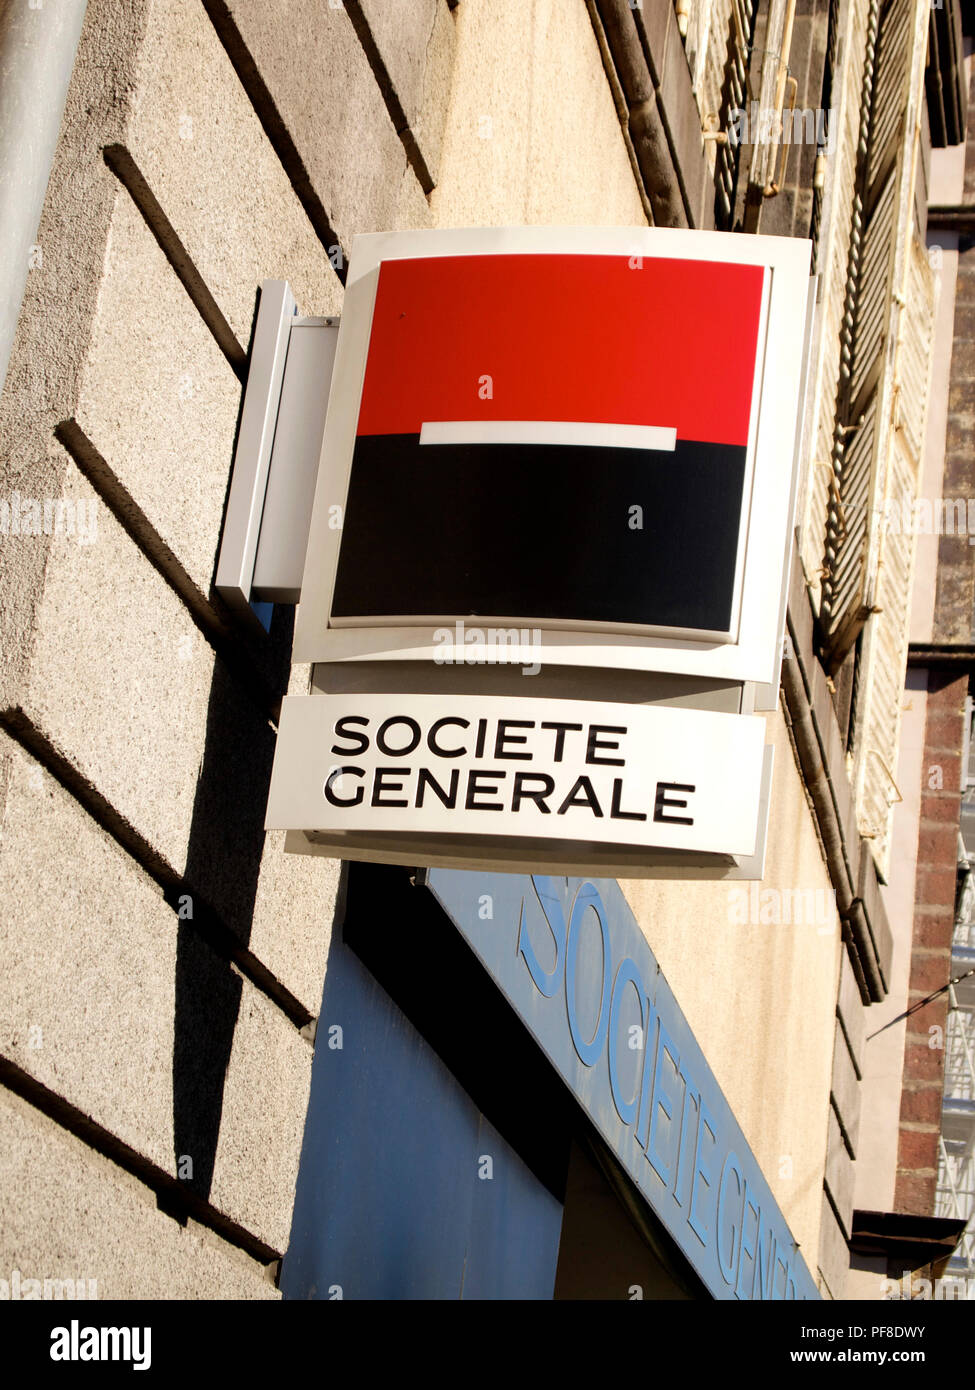 Societe Generale S Egypt Arm Net Income Up 3 Gulf Business